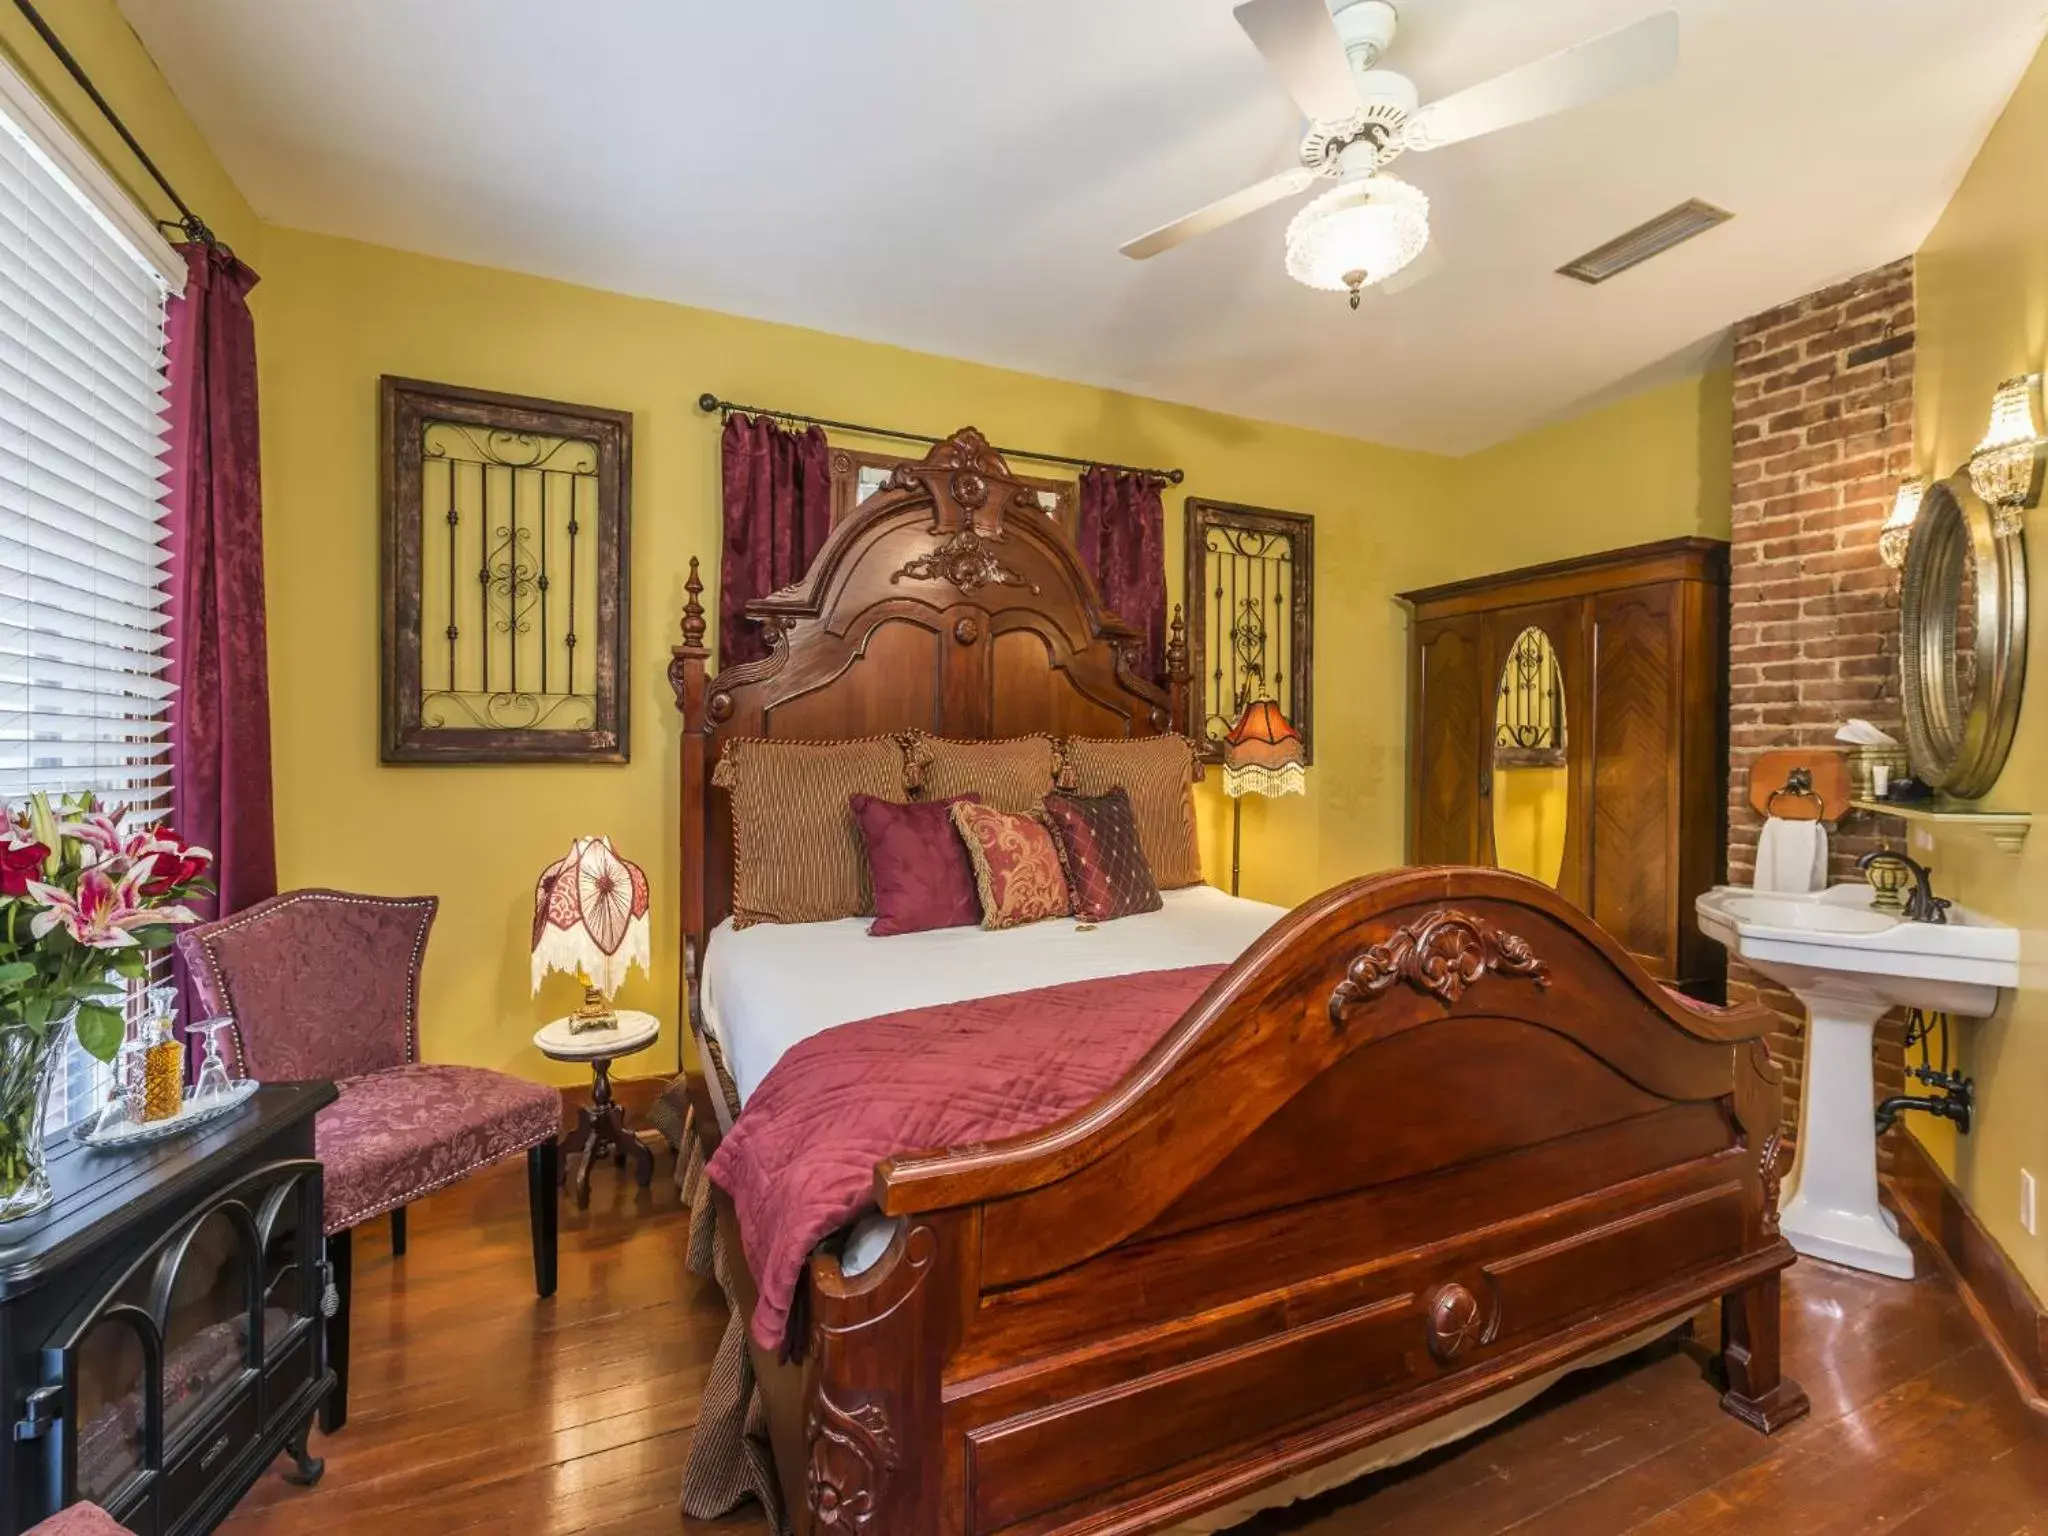 Bed, Room Photo in Carriage Way Inn Bed & Breakfast Adults Only - 21 years old and up